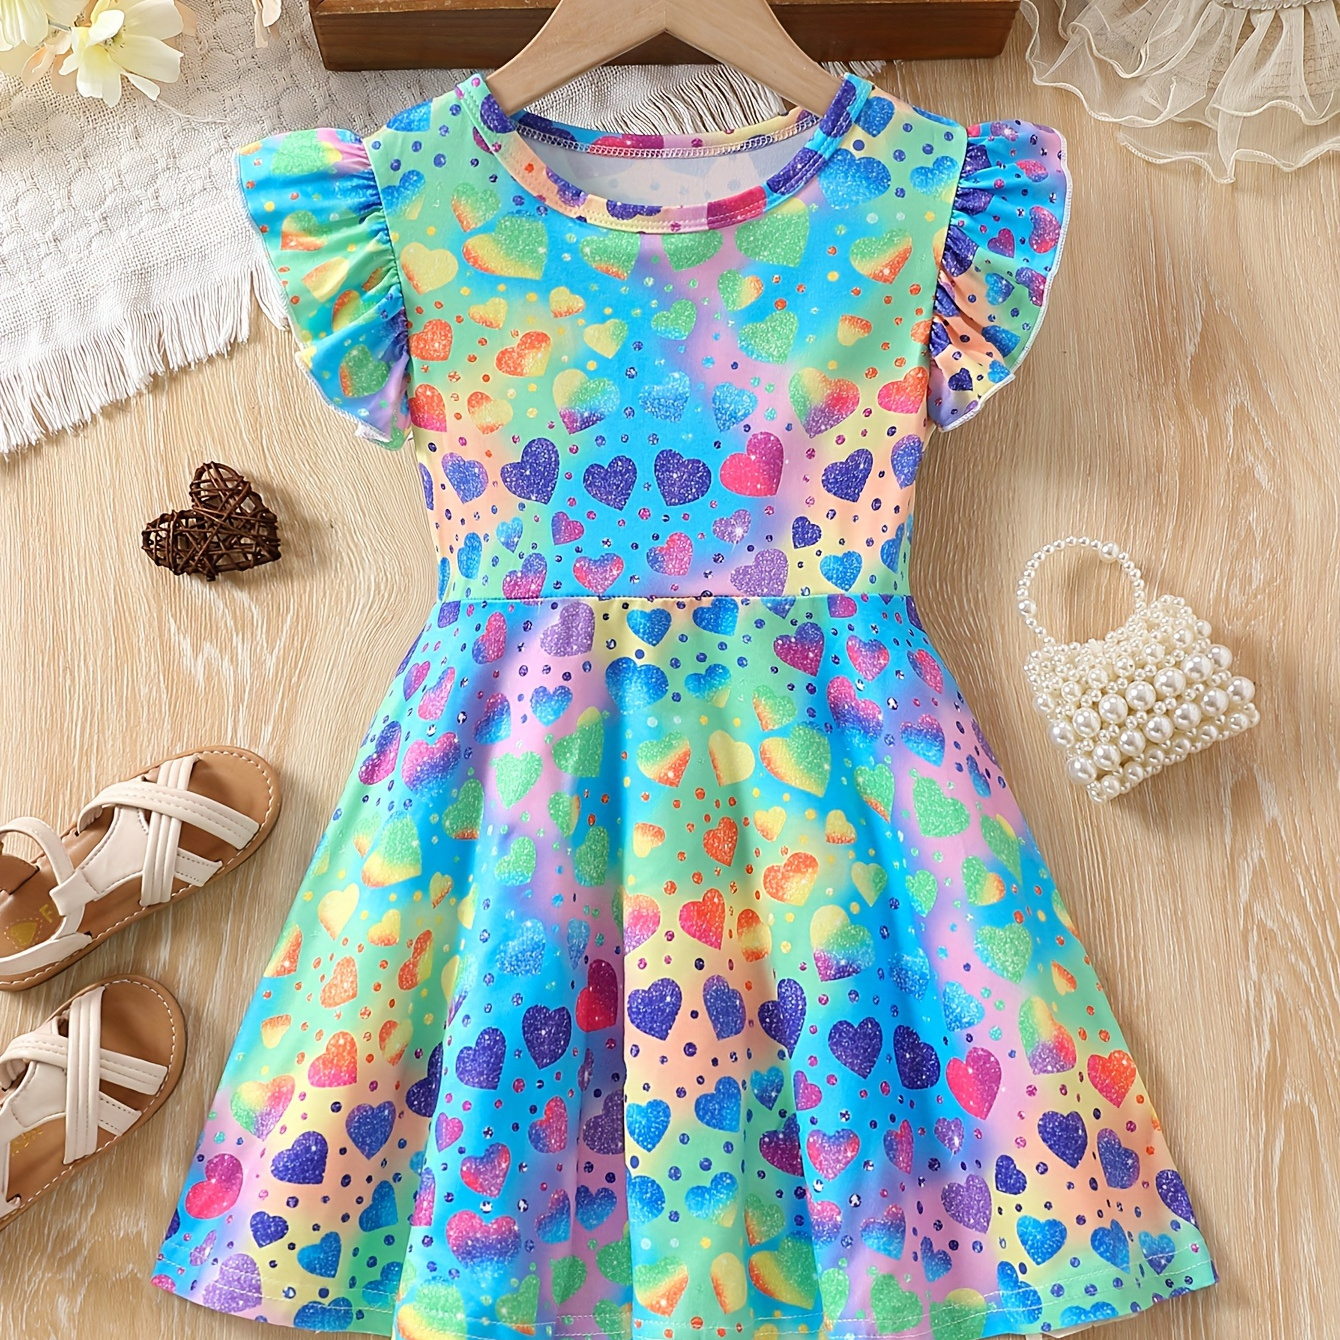 

Girls Sweet Allover Hearts Print Tie Dyed Dress Ruffle Edge Sleeveless Vacation Casual Dress For 1-9 Y